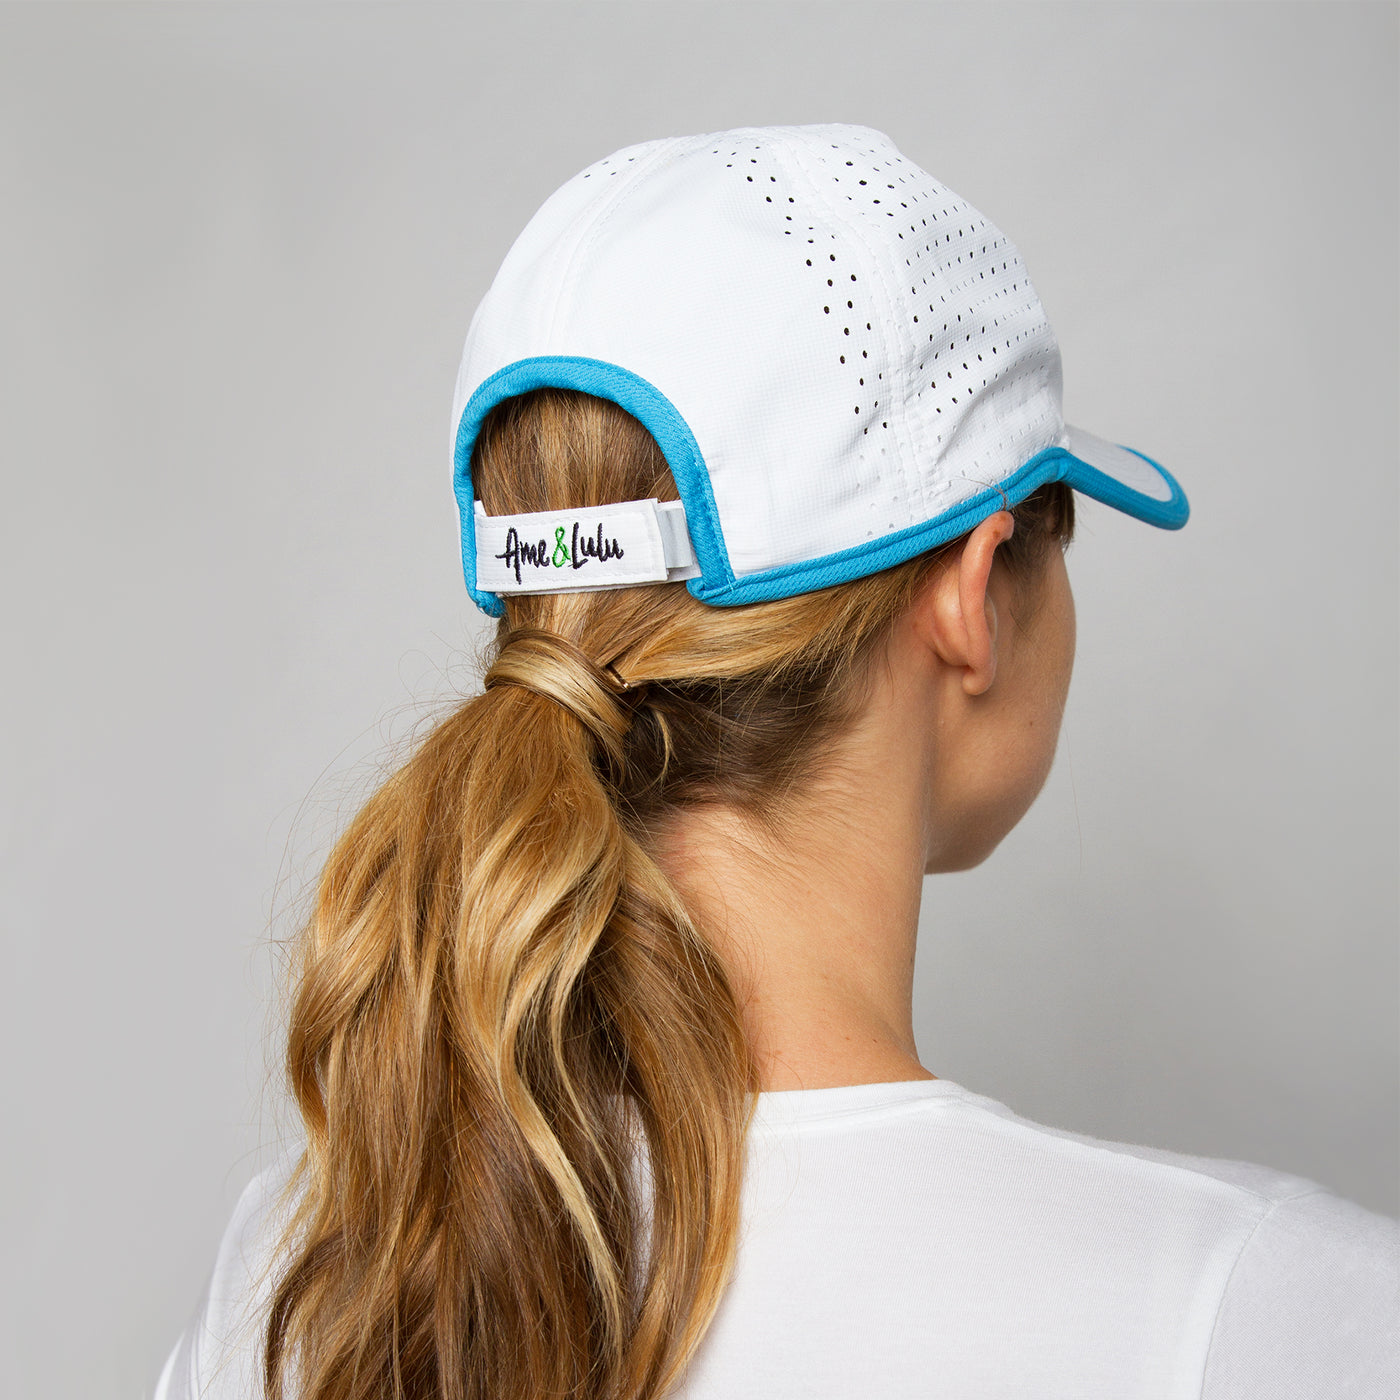 back view of woman wearing white sport hat with blue trim.